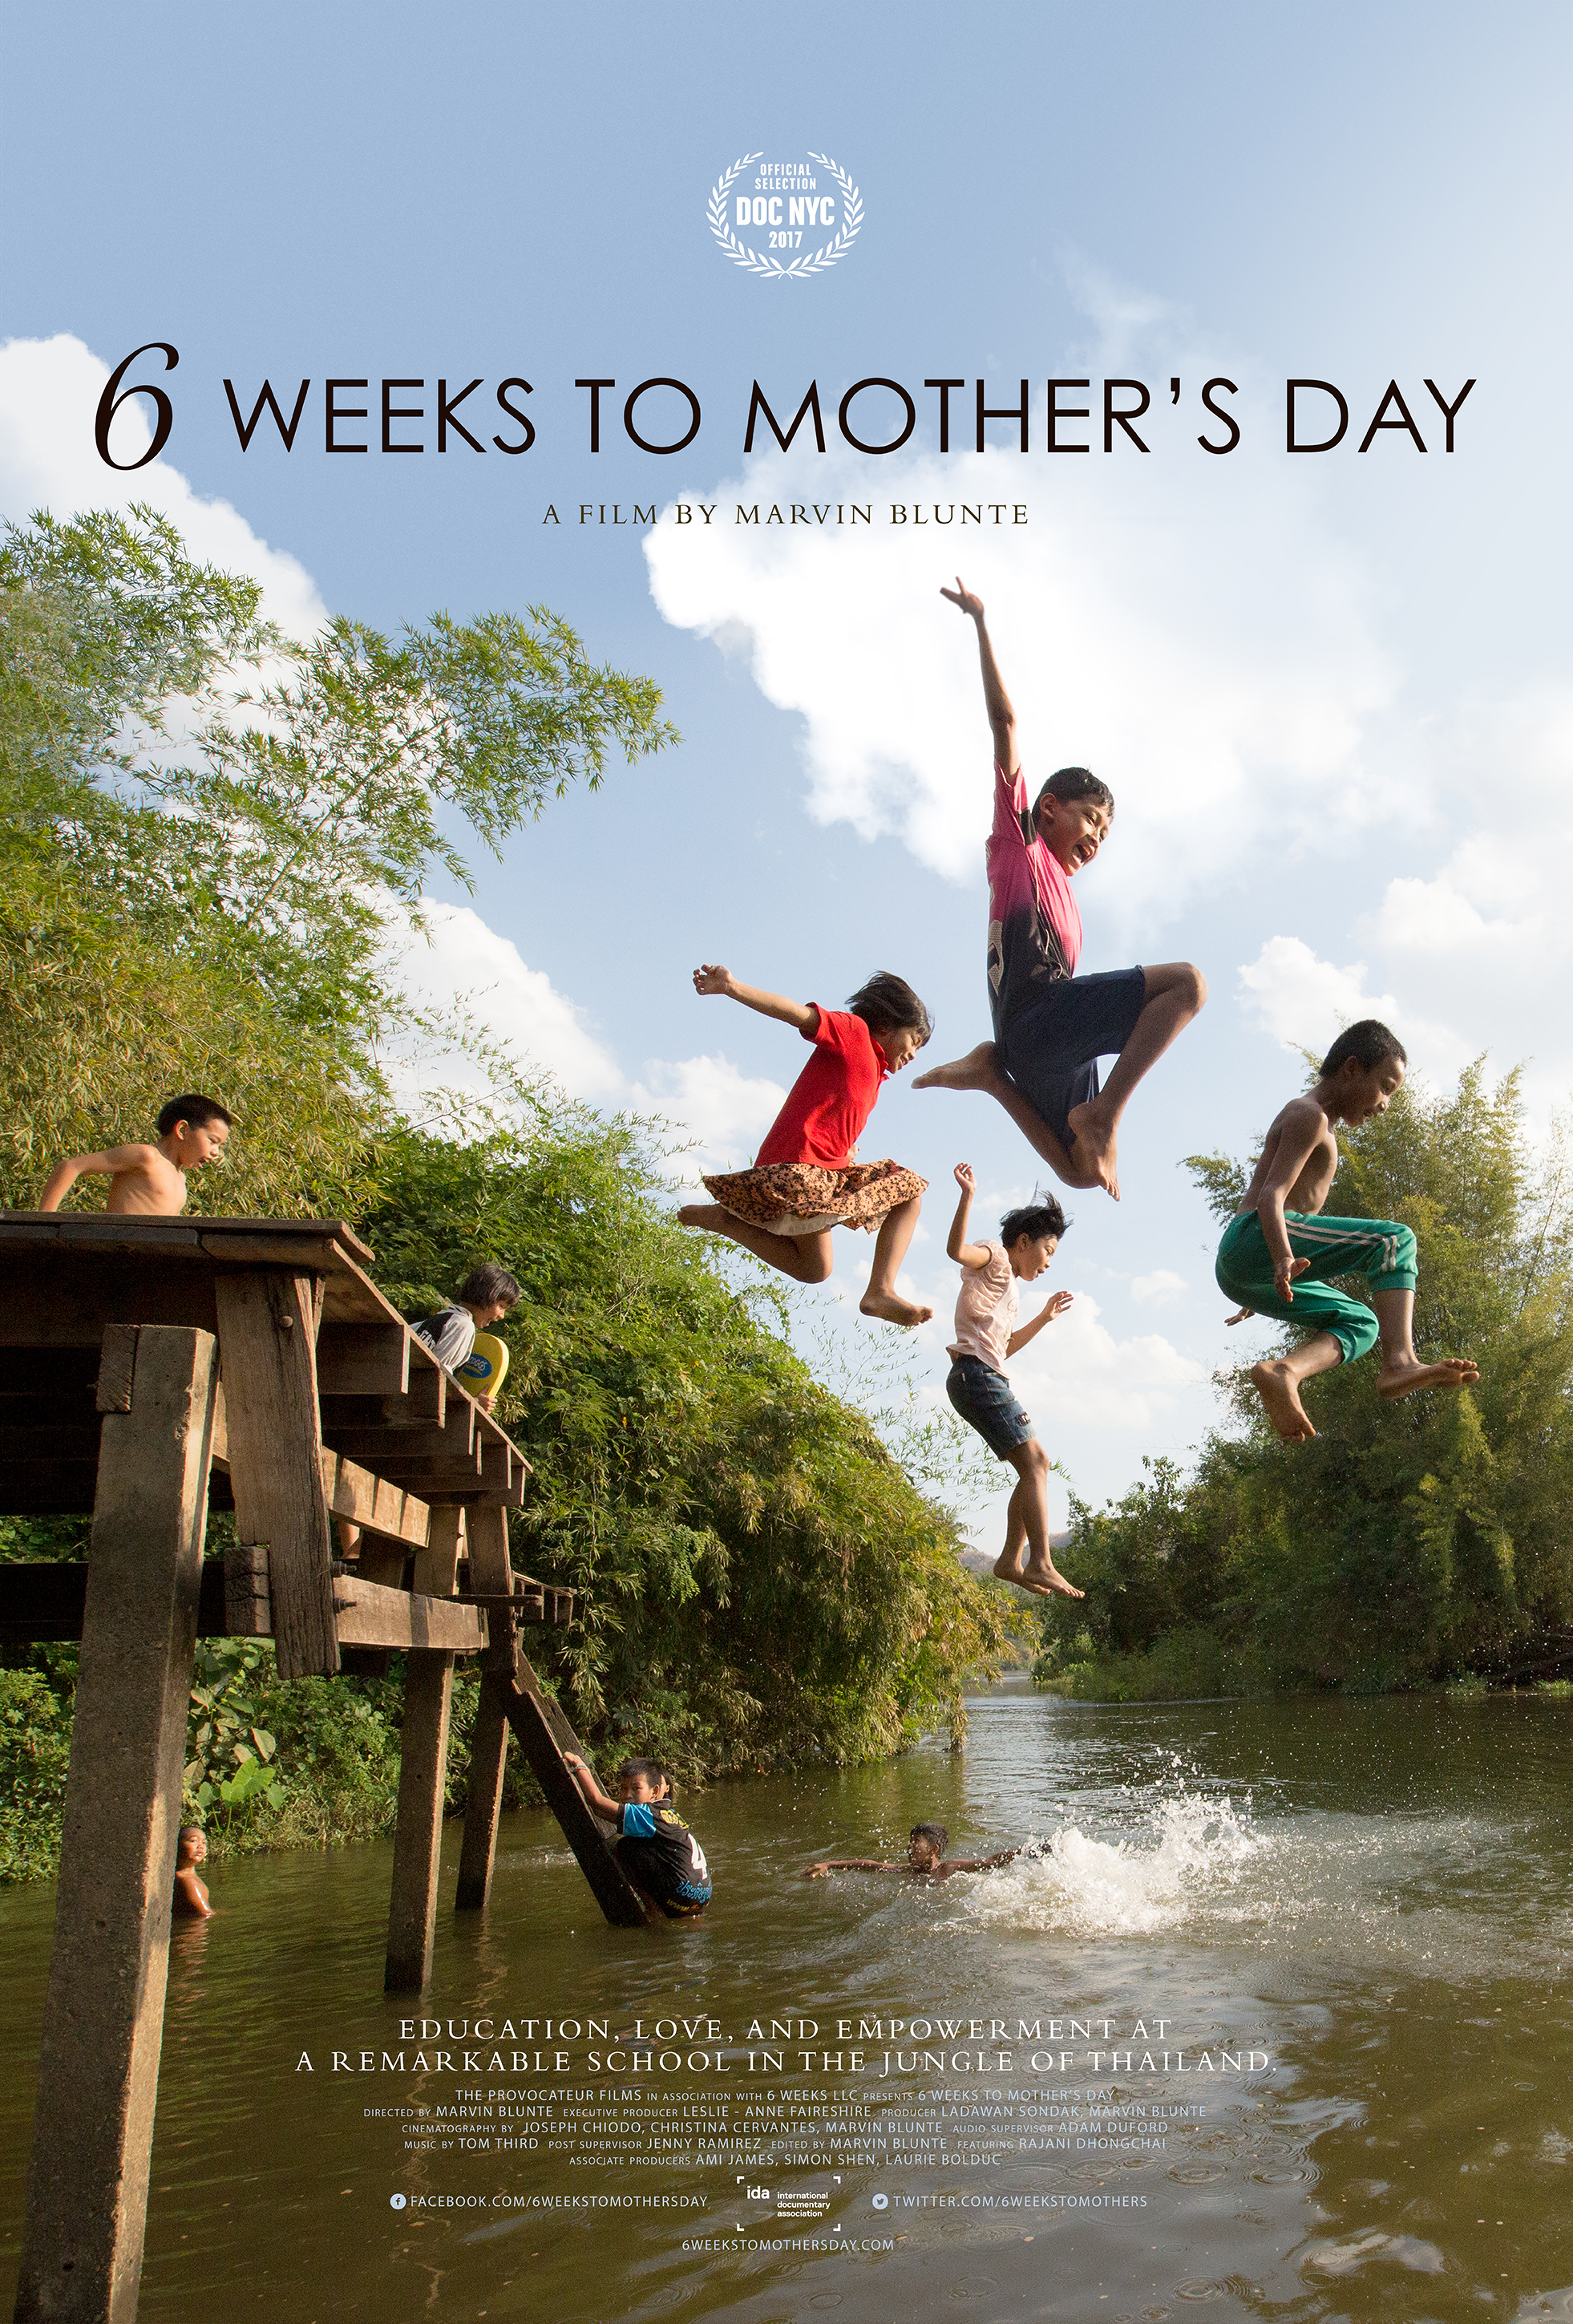 6 Weeks to Mother's Day (2017) Screenshot 2